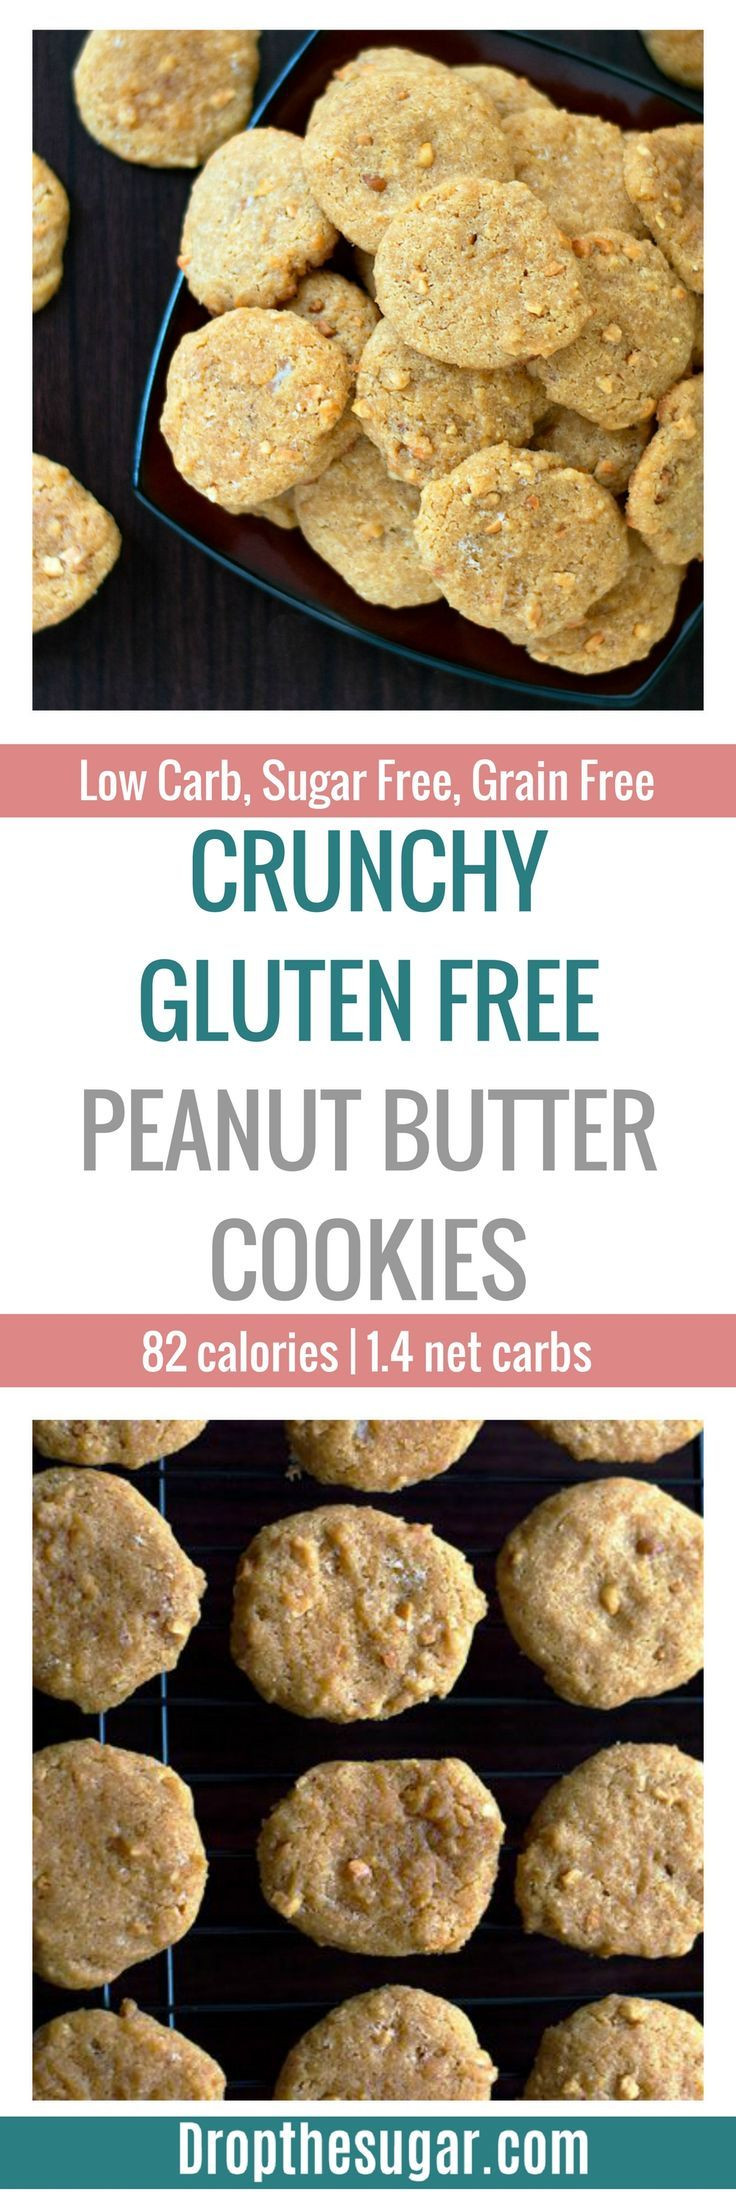 Low Carb Dairy Free Recipes
 17 Best images about Low Carb Cookie Recipes on Pinterest